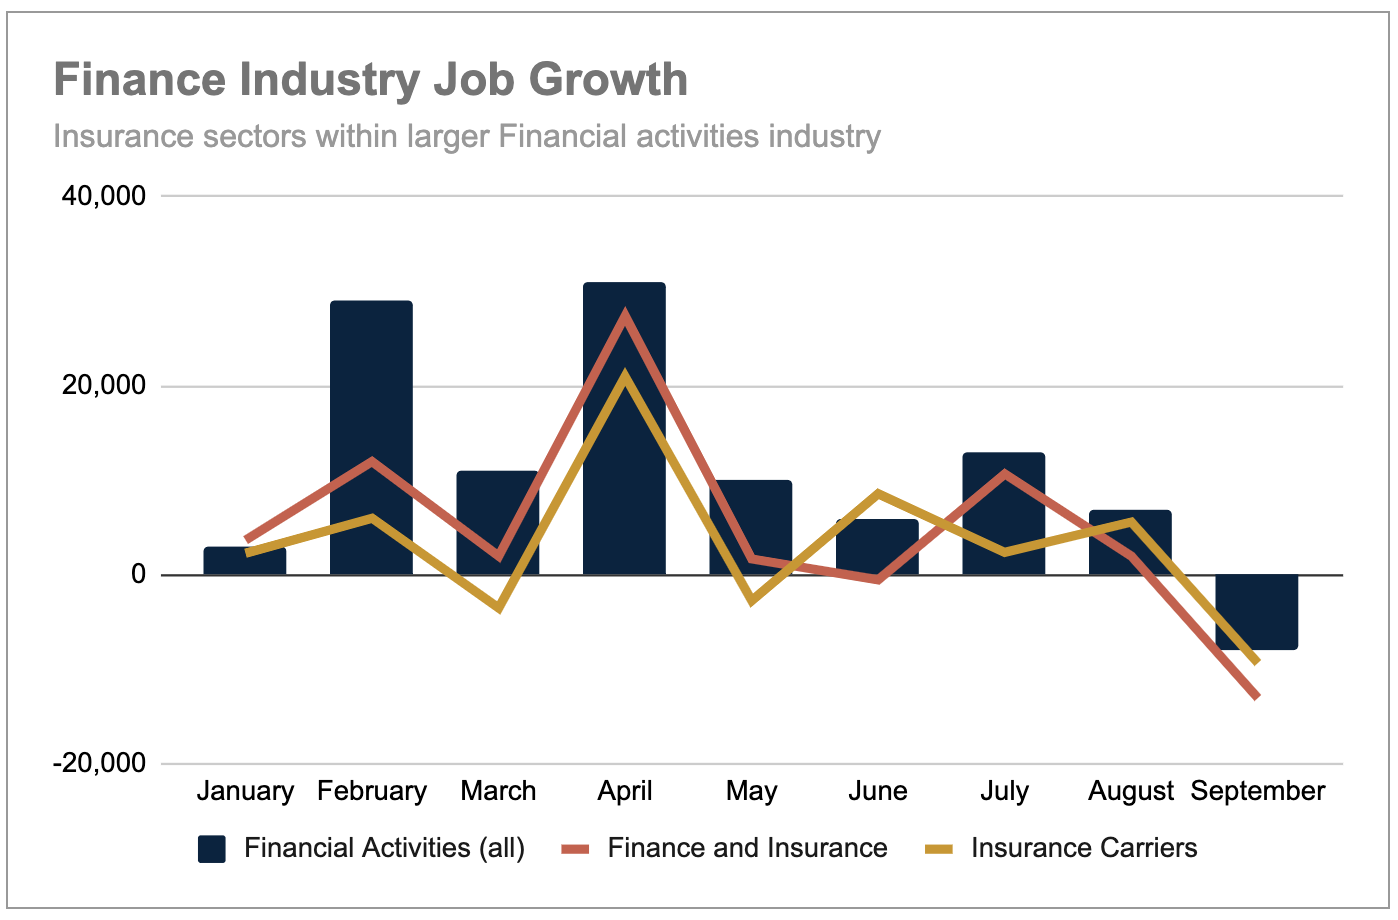 Finance industry job growth, insurance sectors within larger financial activities industry